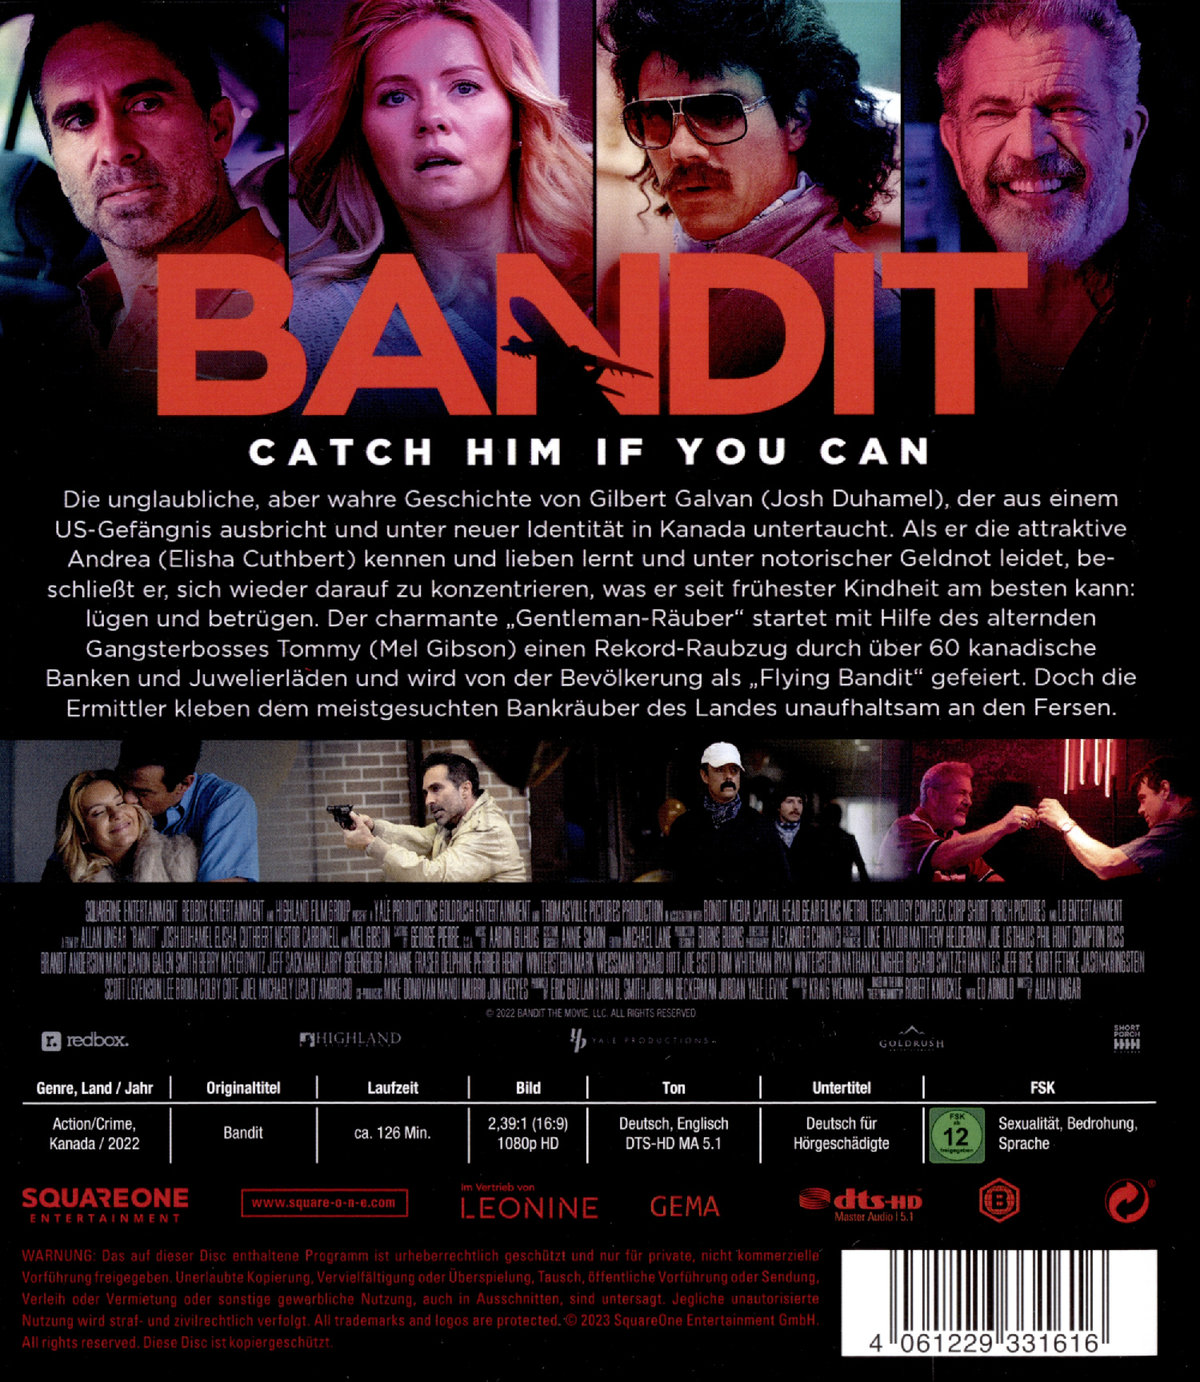 Bandit - Catch him if you can  (Blu-ray Disc)